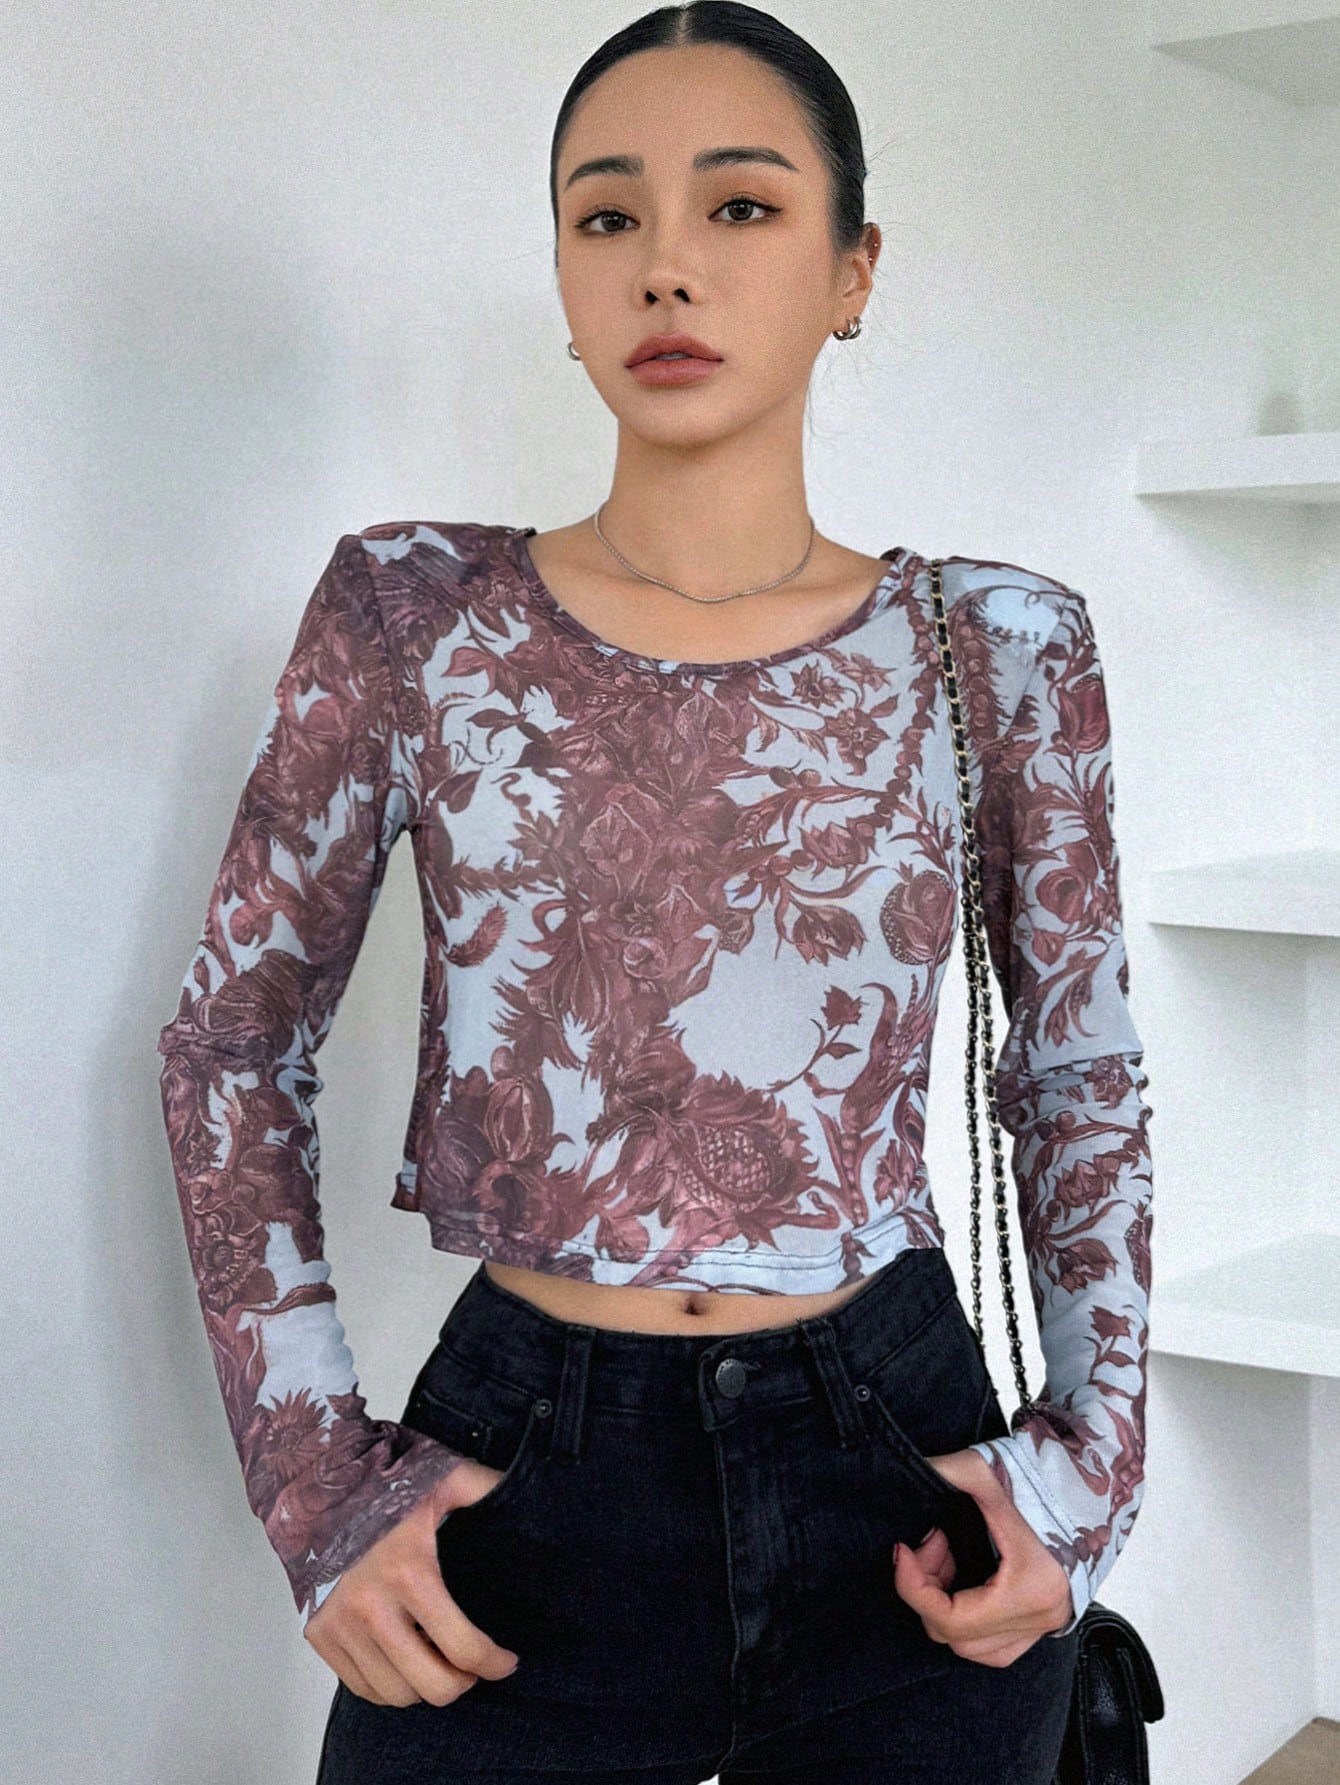 Full-Body Floral Mesh Sheer Long Sleeve Round Neck Cropped Women Top